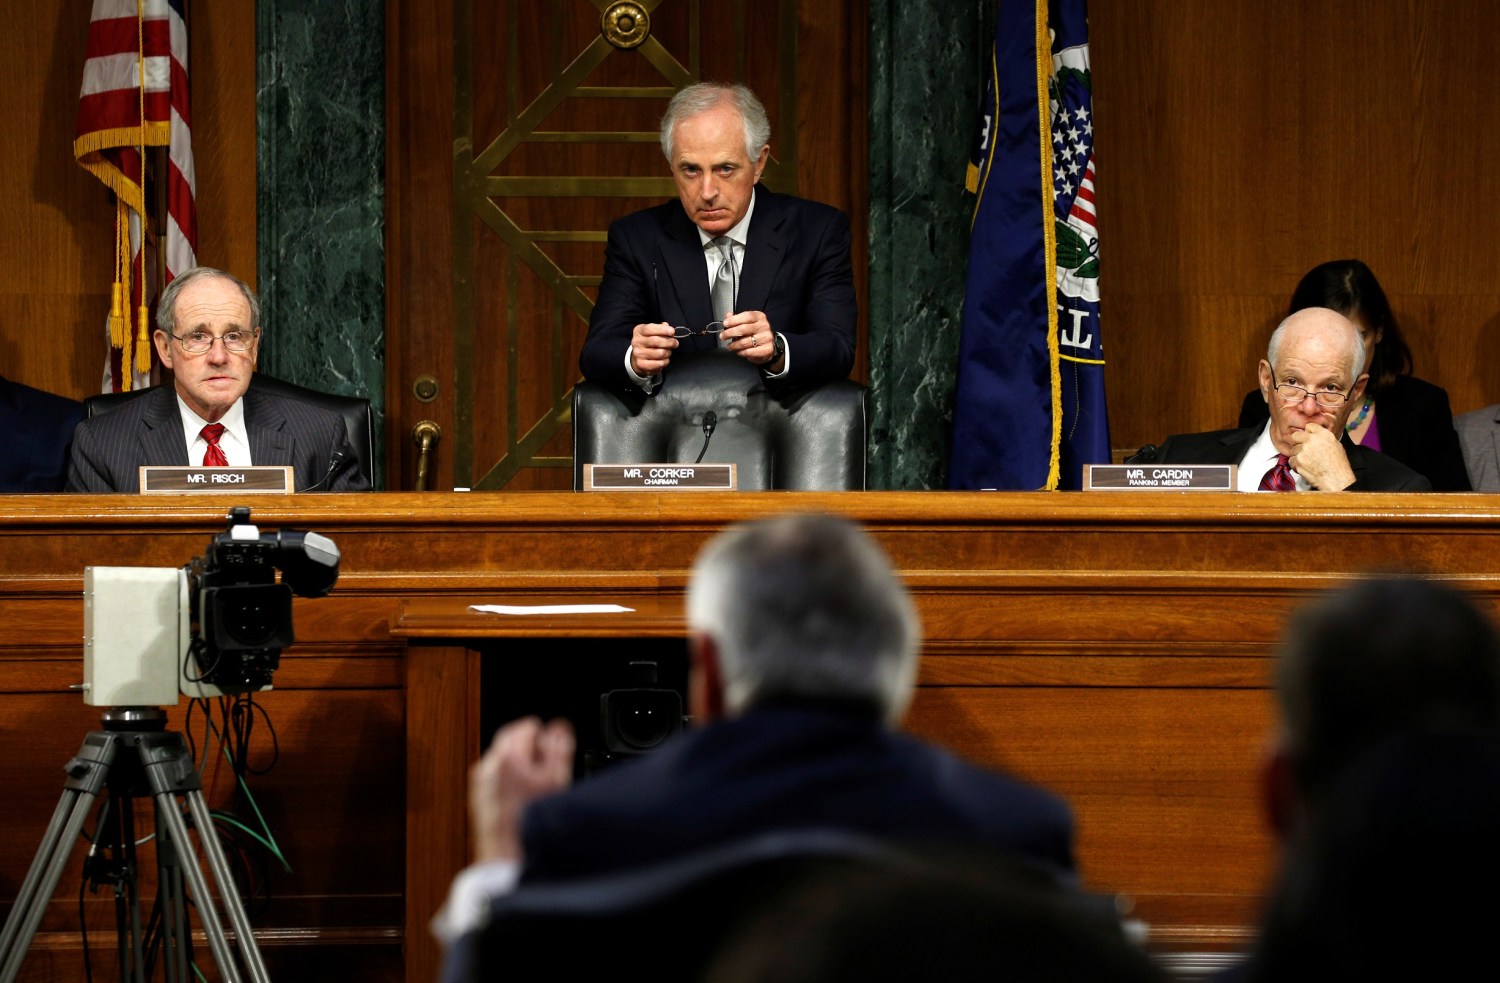 Senate Foreign Relations Committee Chairman Bob Corker (C) listens as Secretary of State nominee Rex Tillerson (foreground) testifies during his confirmation hearing on Capitol Hill in Washington, U.S. January 11, 2017. REUTERS/Kevin Lamarque - RC1CA93CEDC0